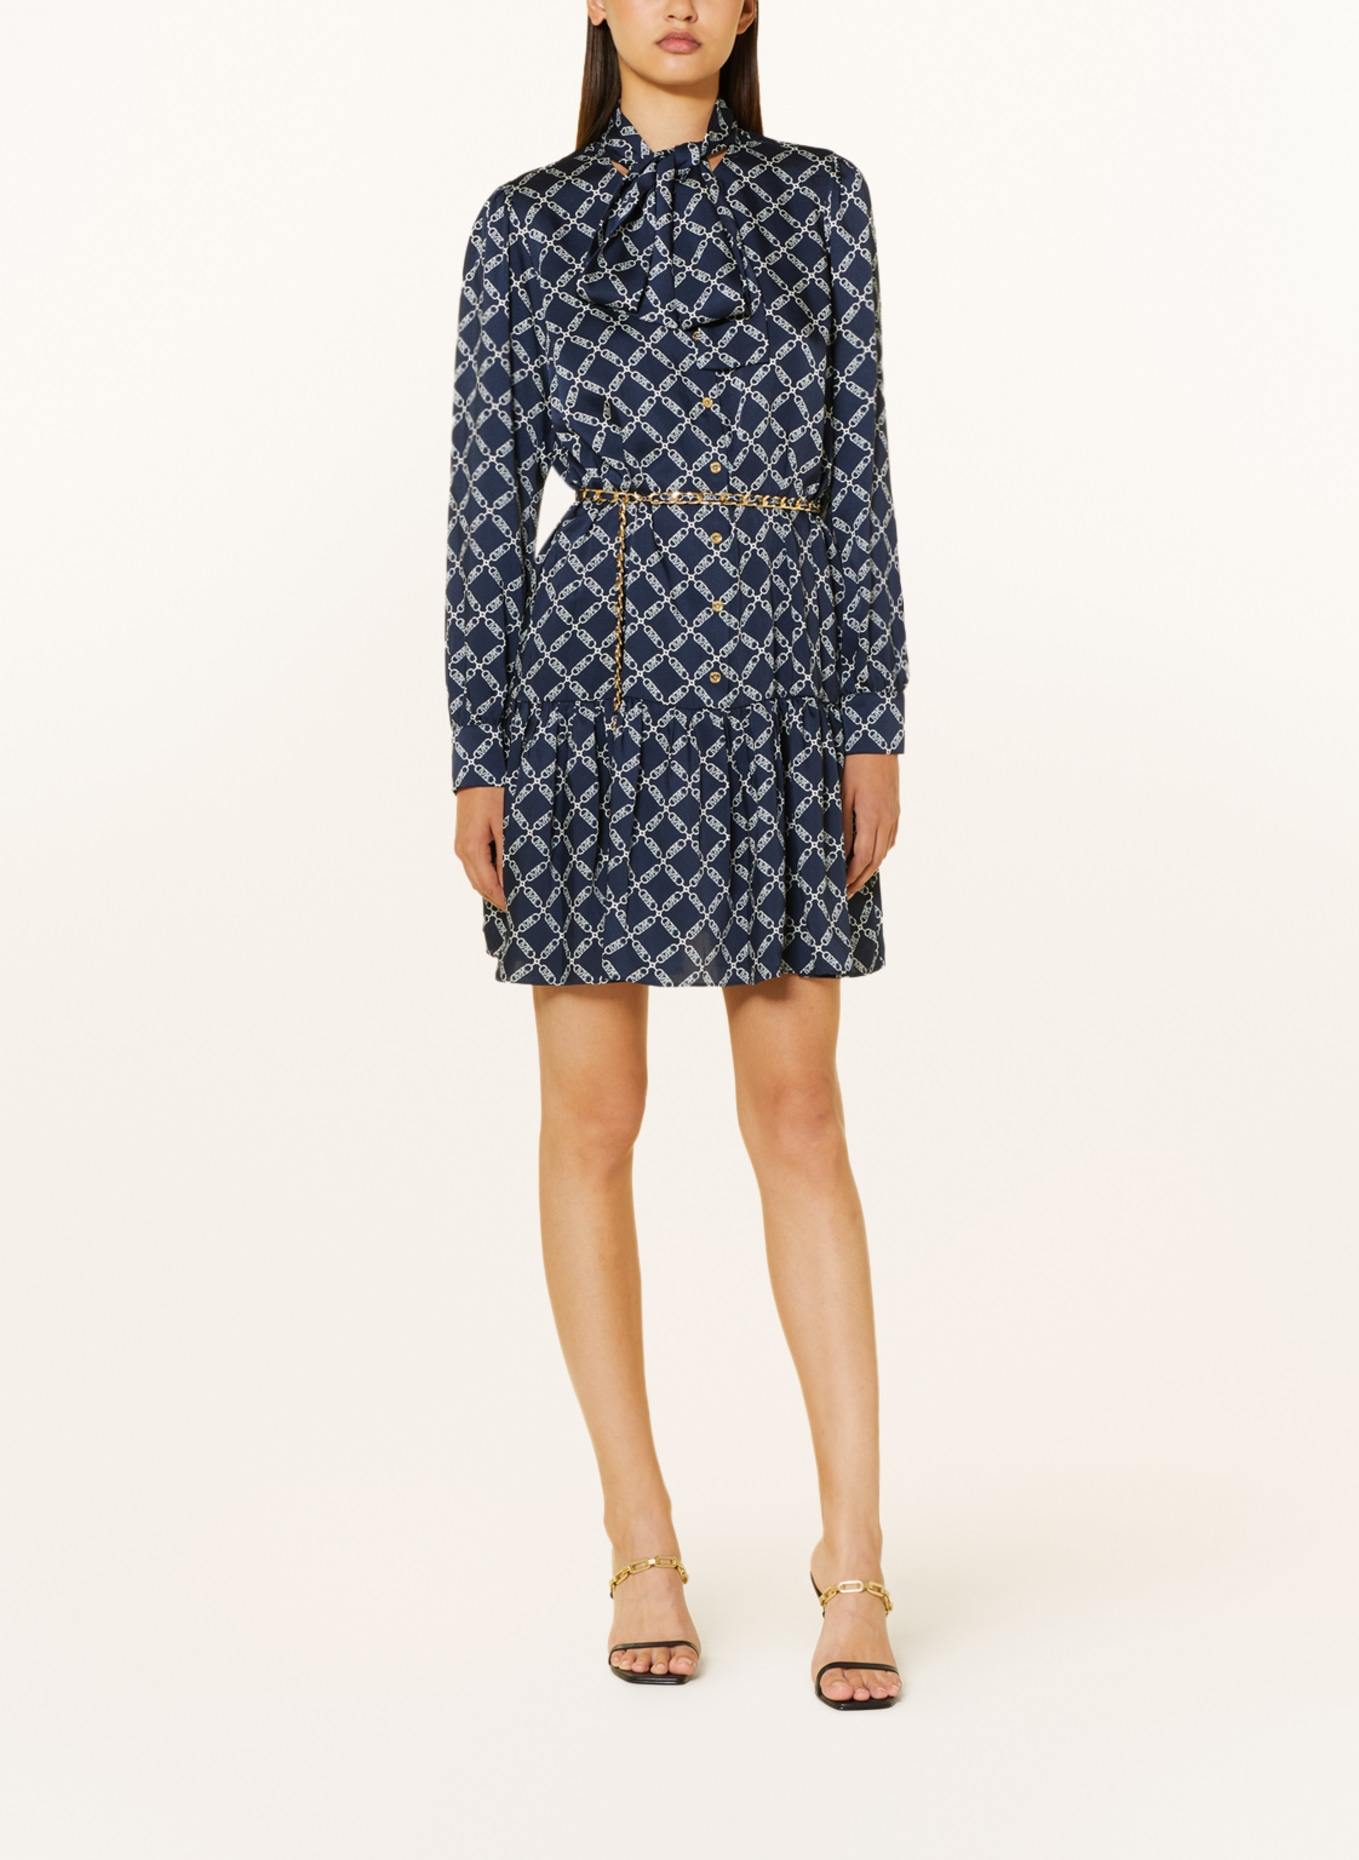 MICHAEL KORS Shirt dress with bow, Color: DARK BLUE/ WHITE (Image 3)